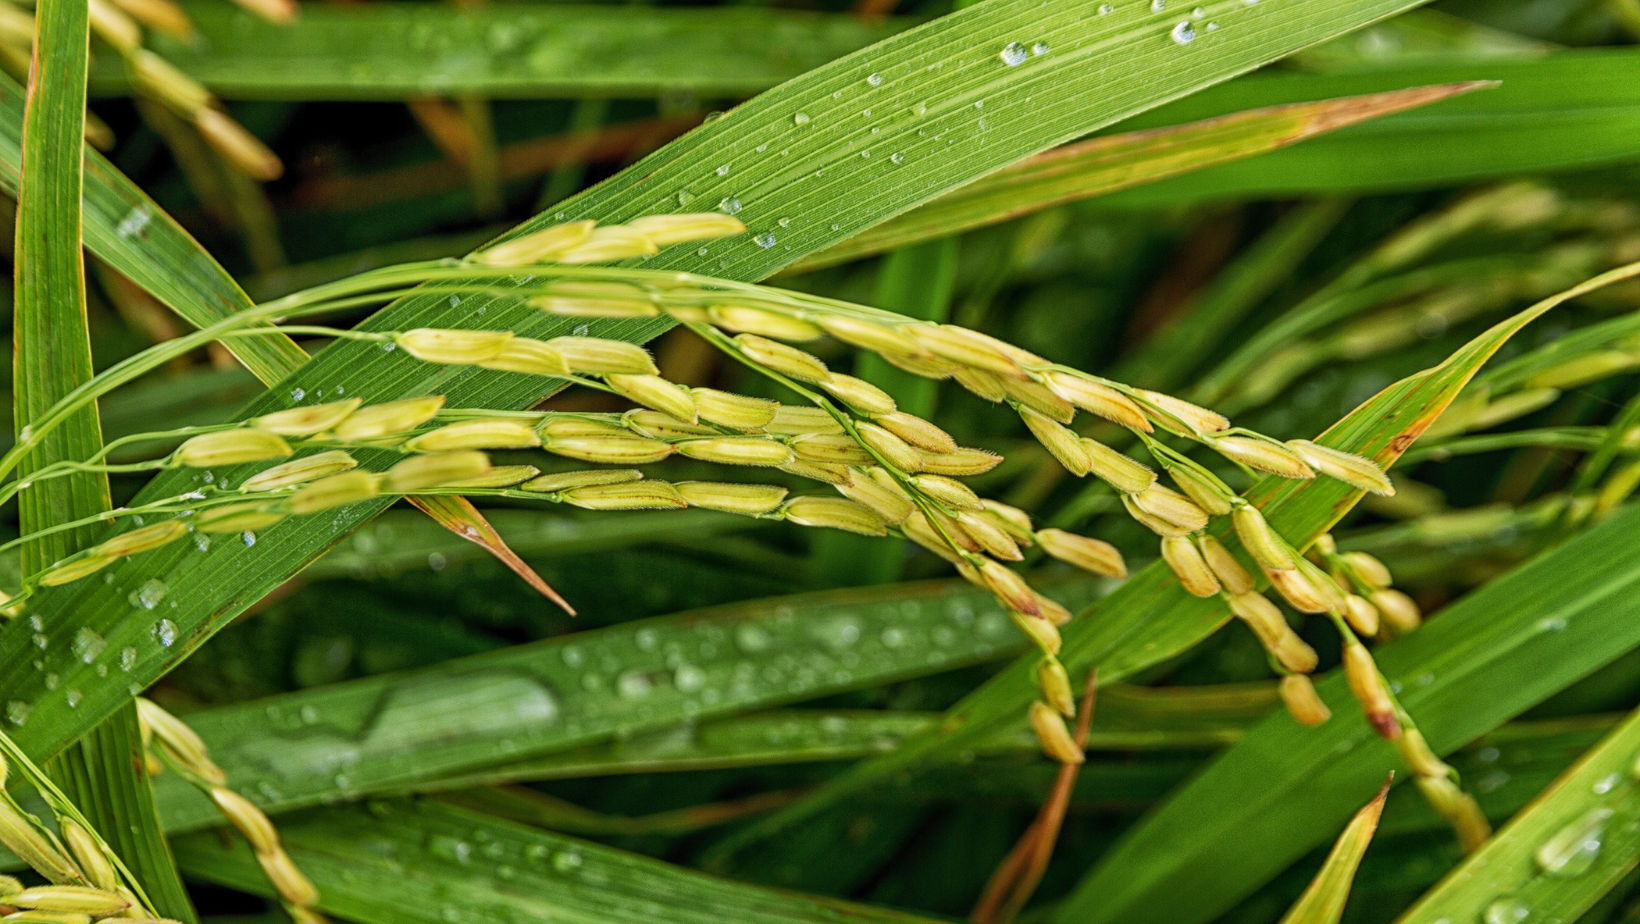 Rice Production Down in 2021 Despite Strong Yields